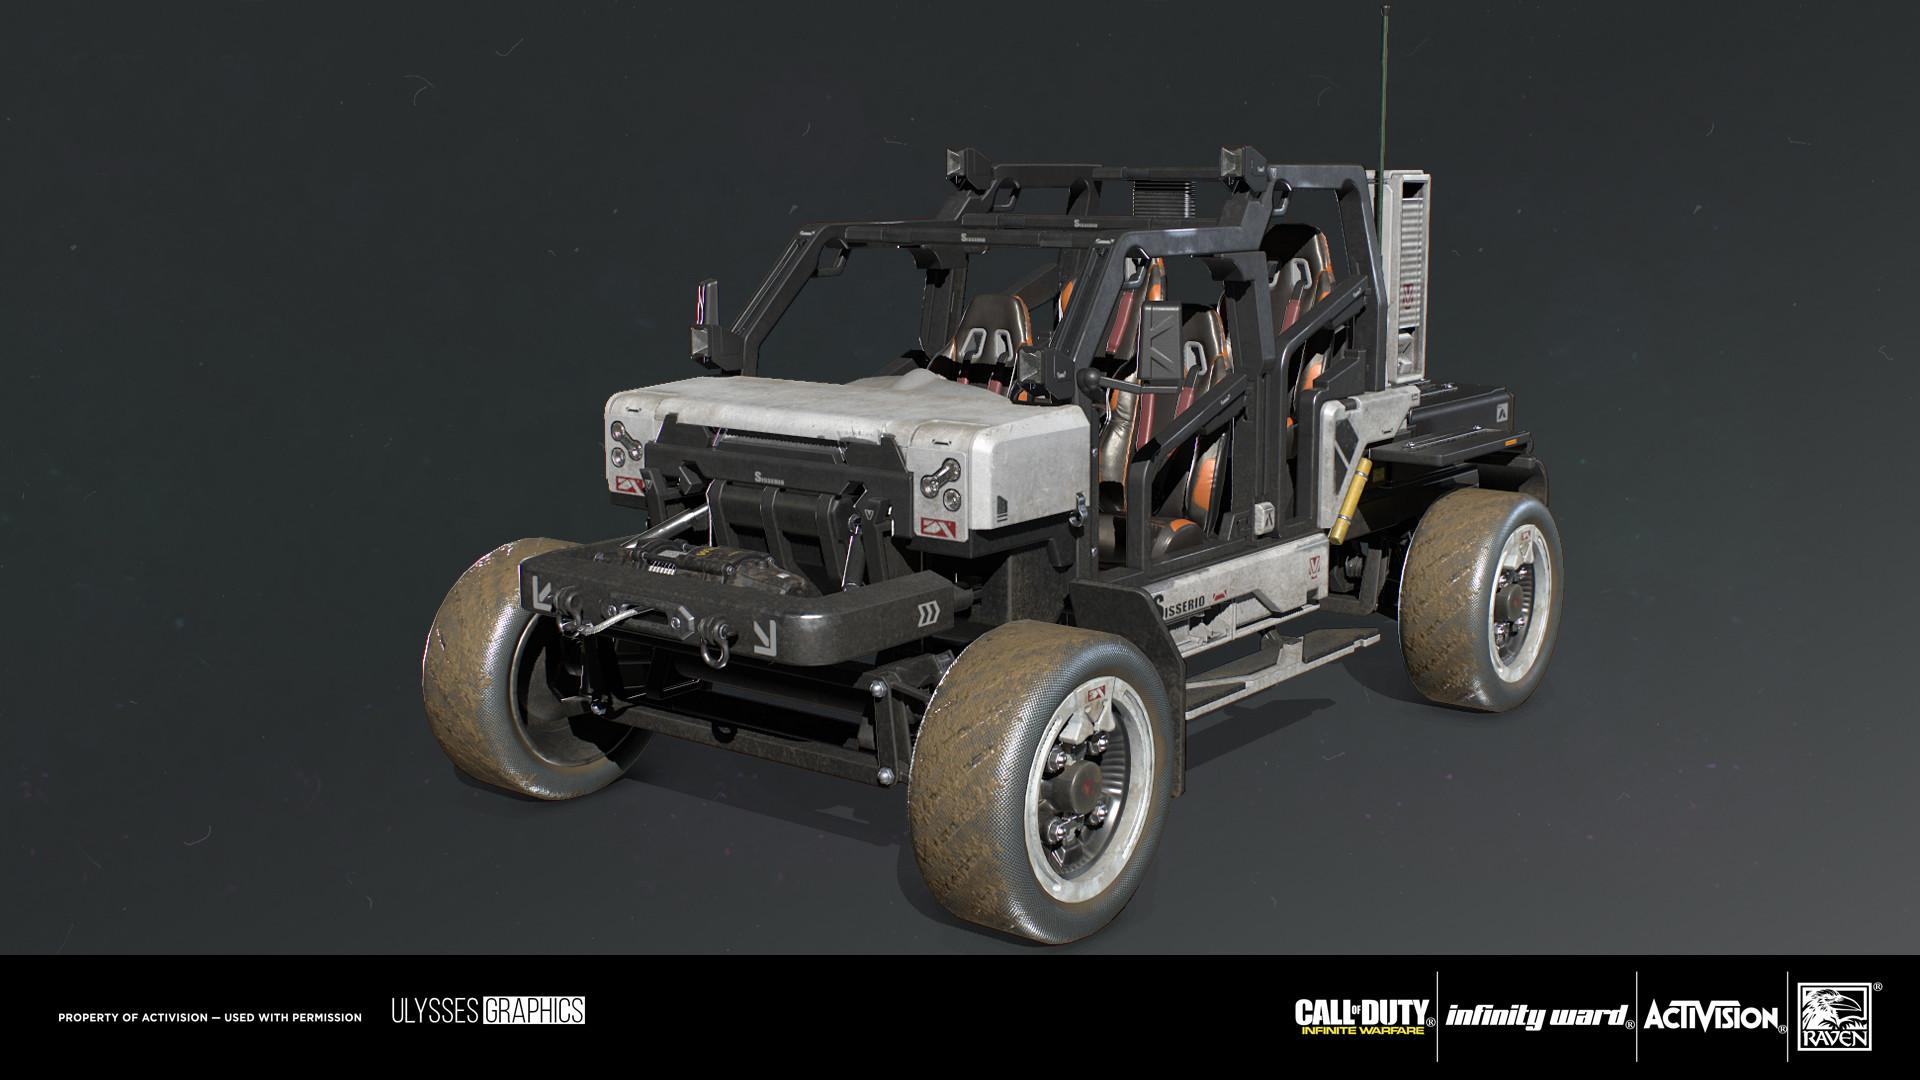 In Game Vehicles For Call Of Duty: Infinite